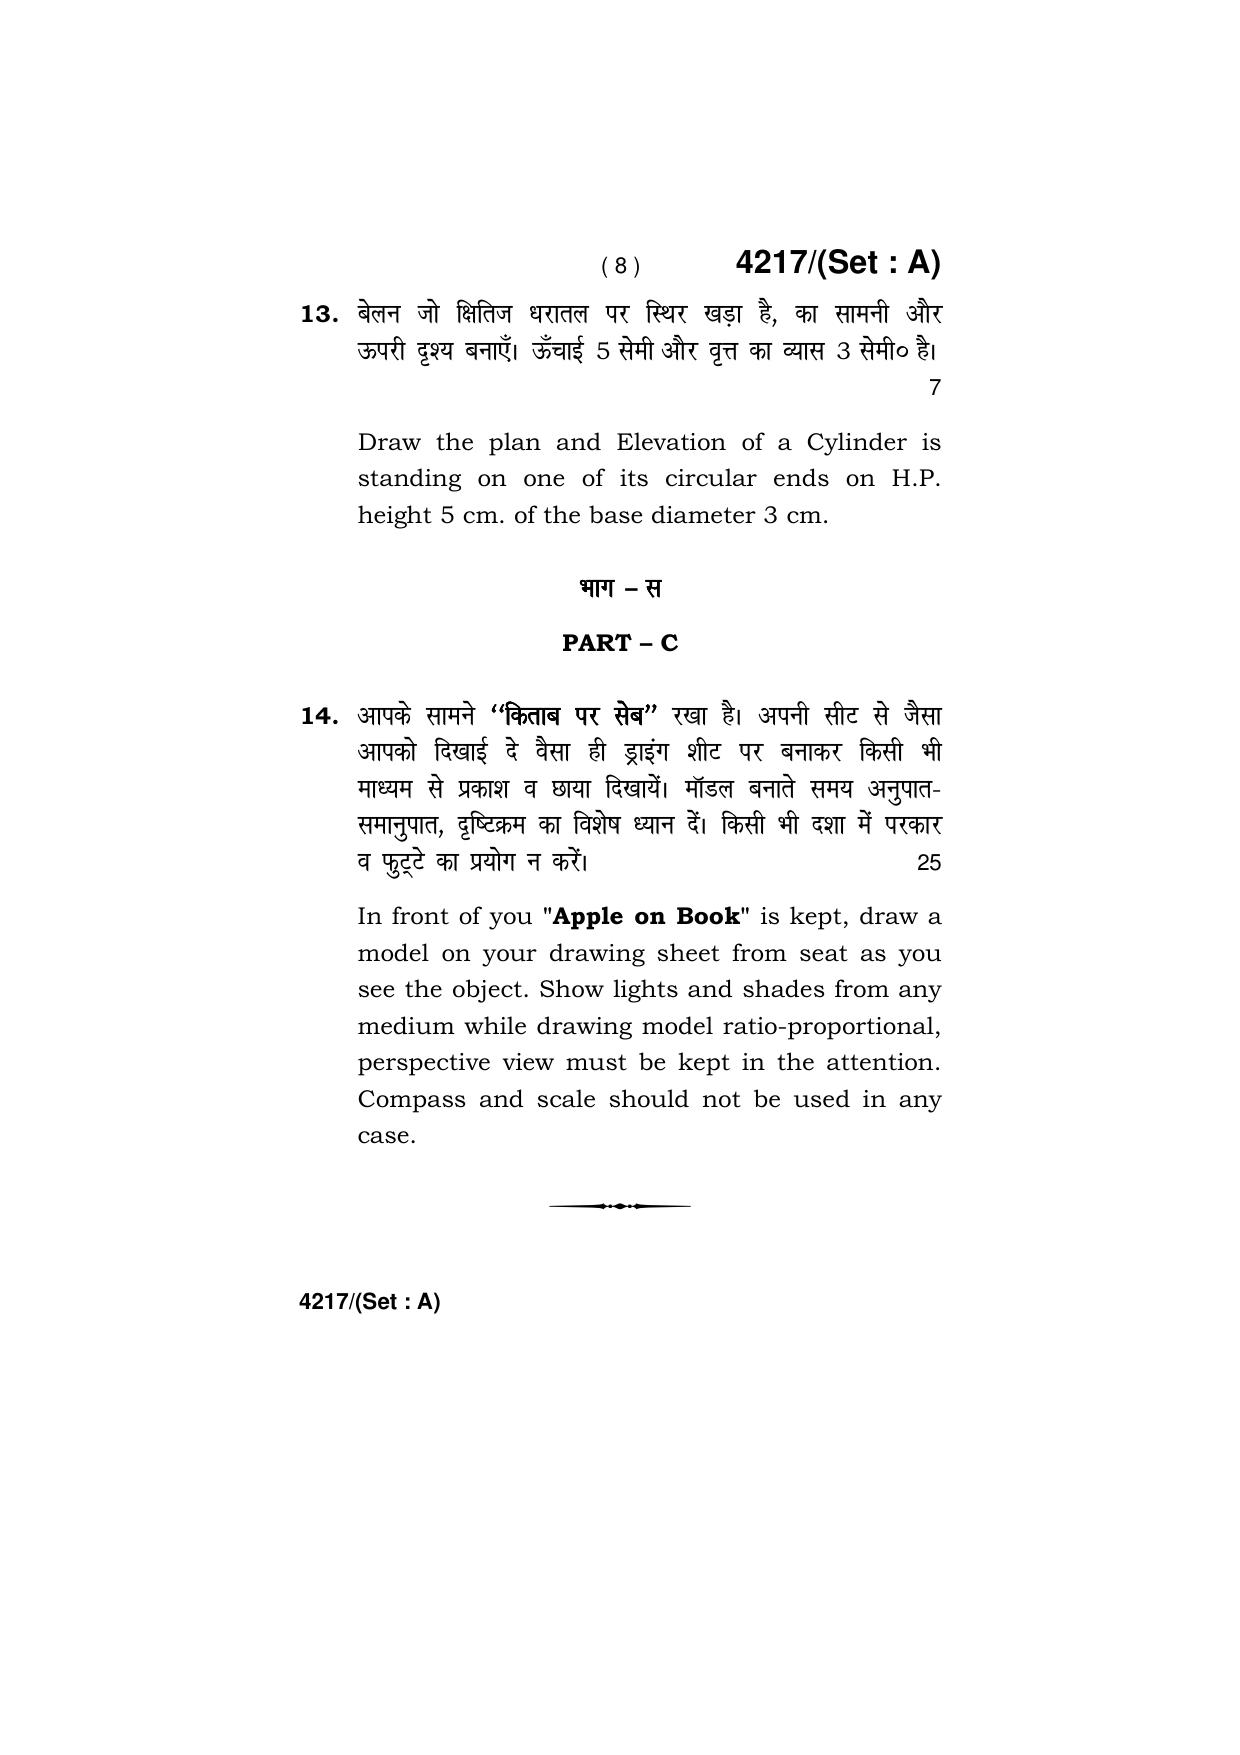 Haryana Board HBSE Class 10 Drawing (All Set) 2019 Question Paper - Page 8